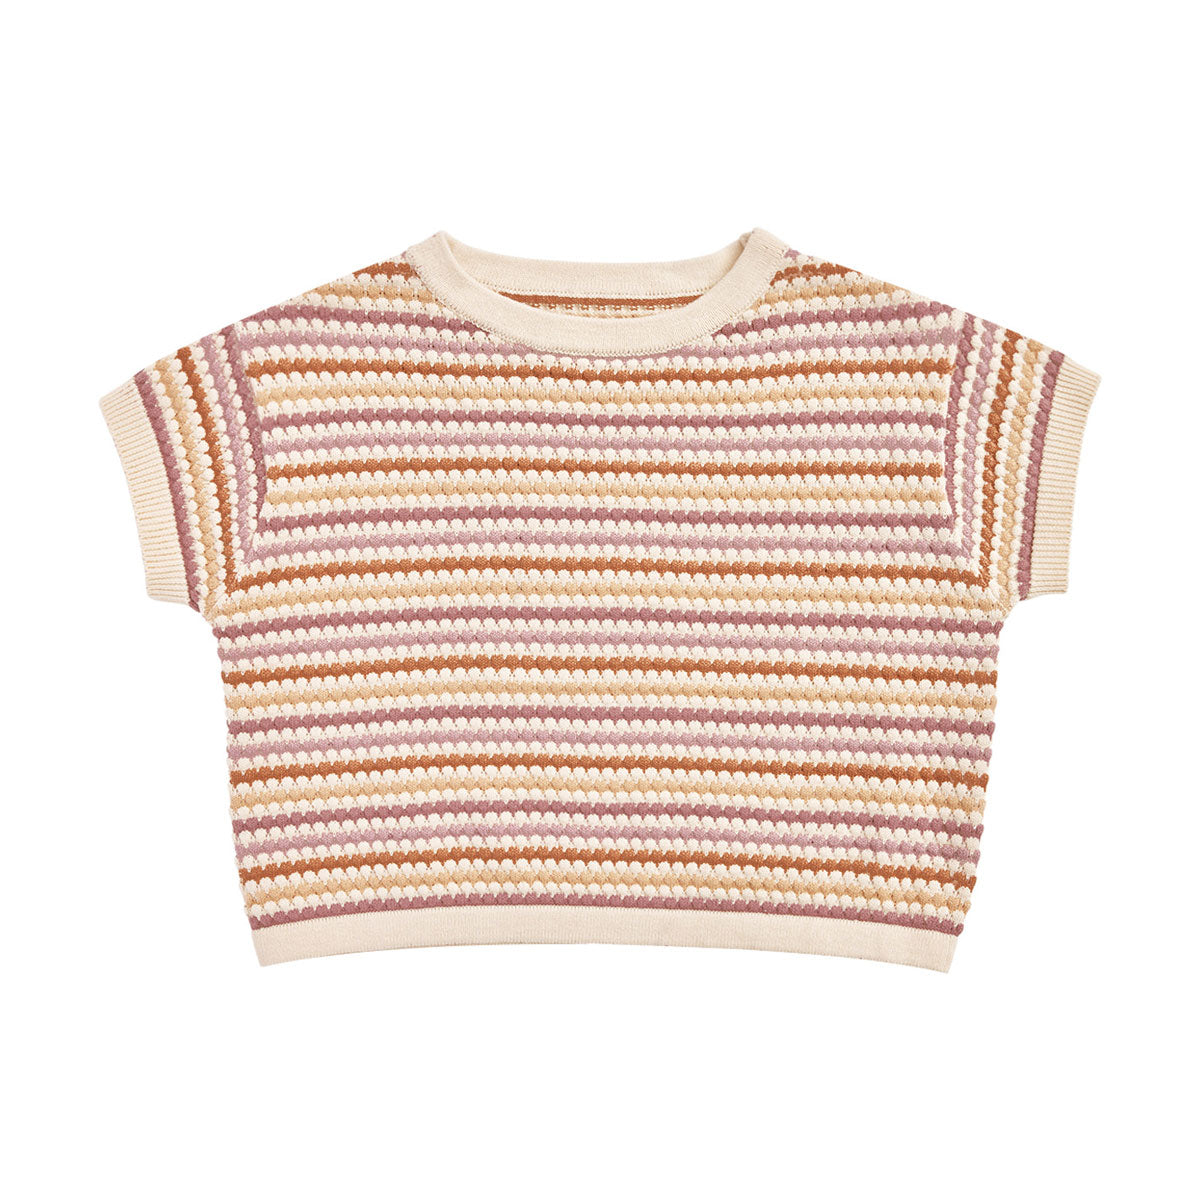 Rylee and Cru Boxy Crop Knit Tee - Honeycomb Stripe - Mulberry / Mauve / Clay / Sand